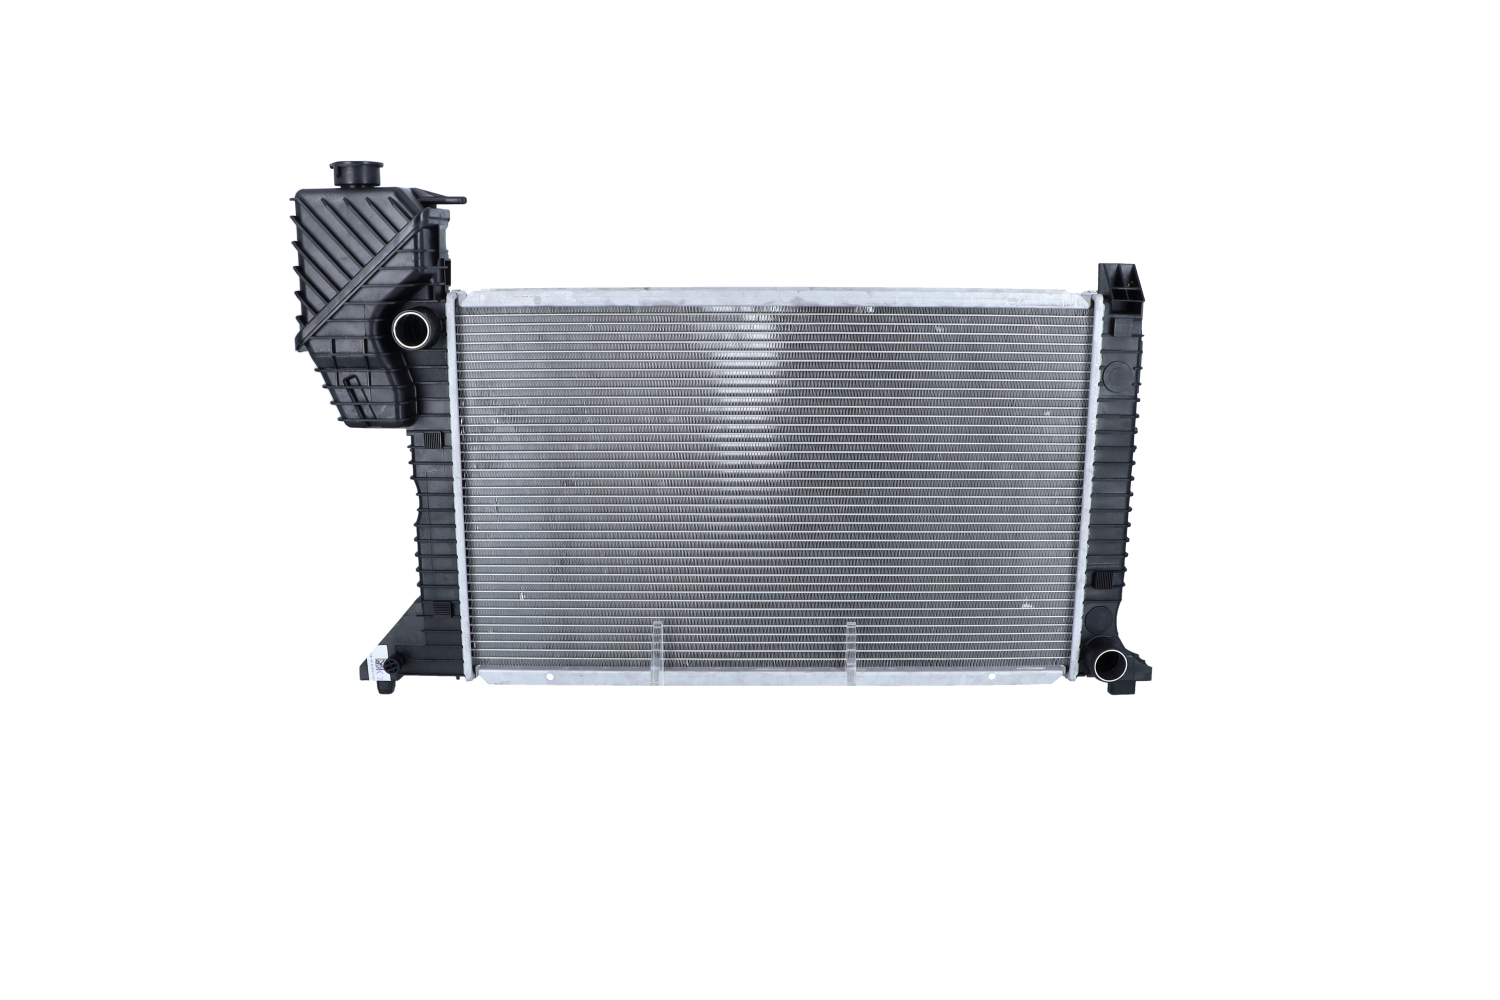 NRF 50558 Engine radiator Aluminium, 680 x 408 x 33 mm, with mounting parts, Brazed cooling fins